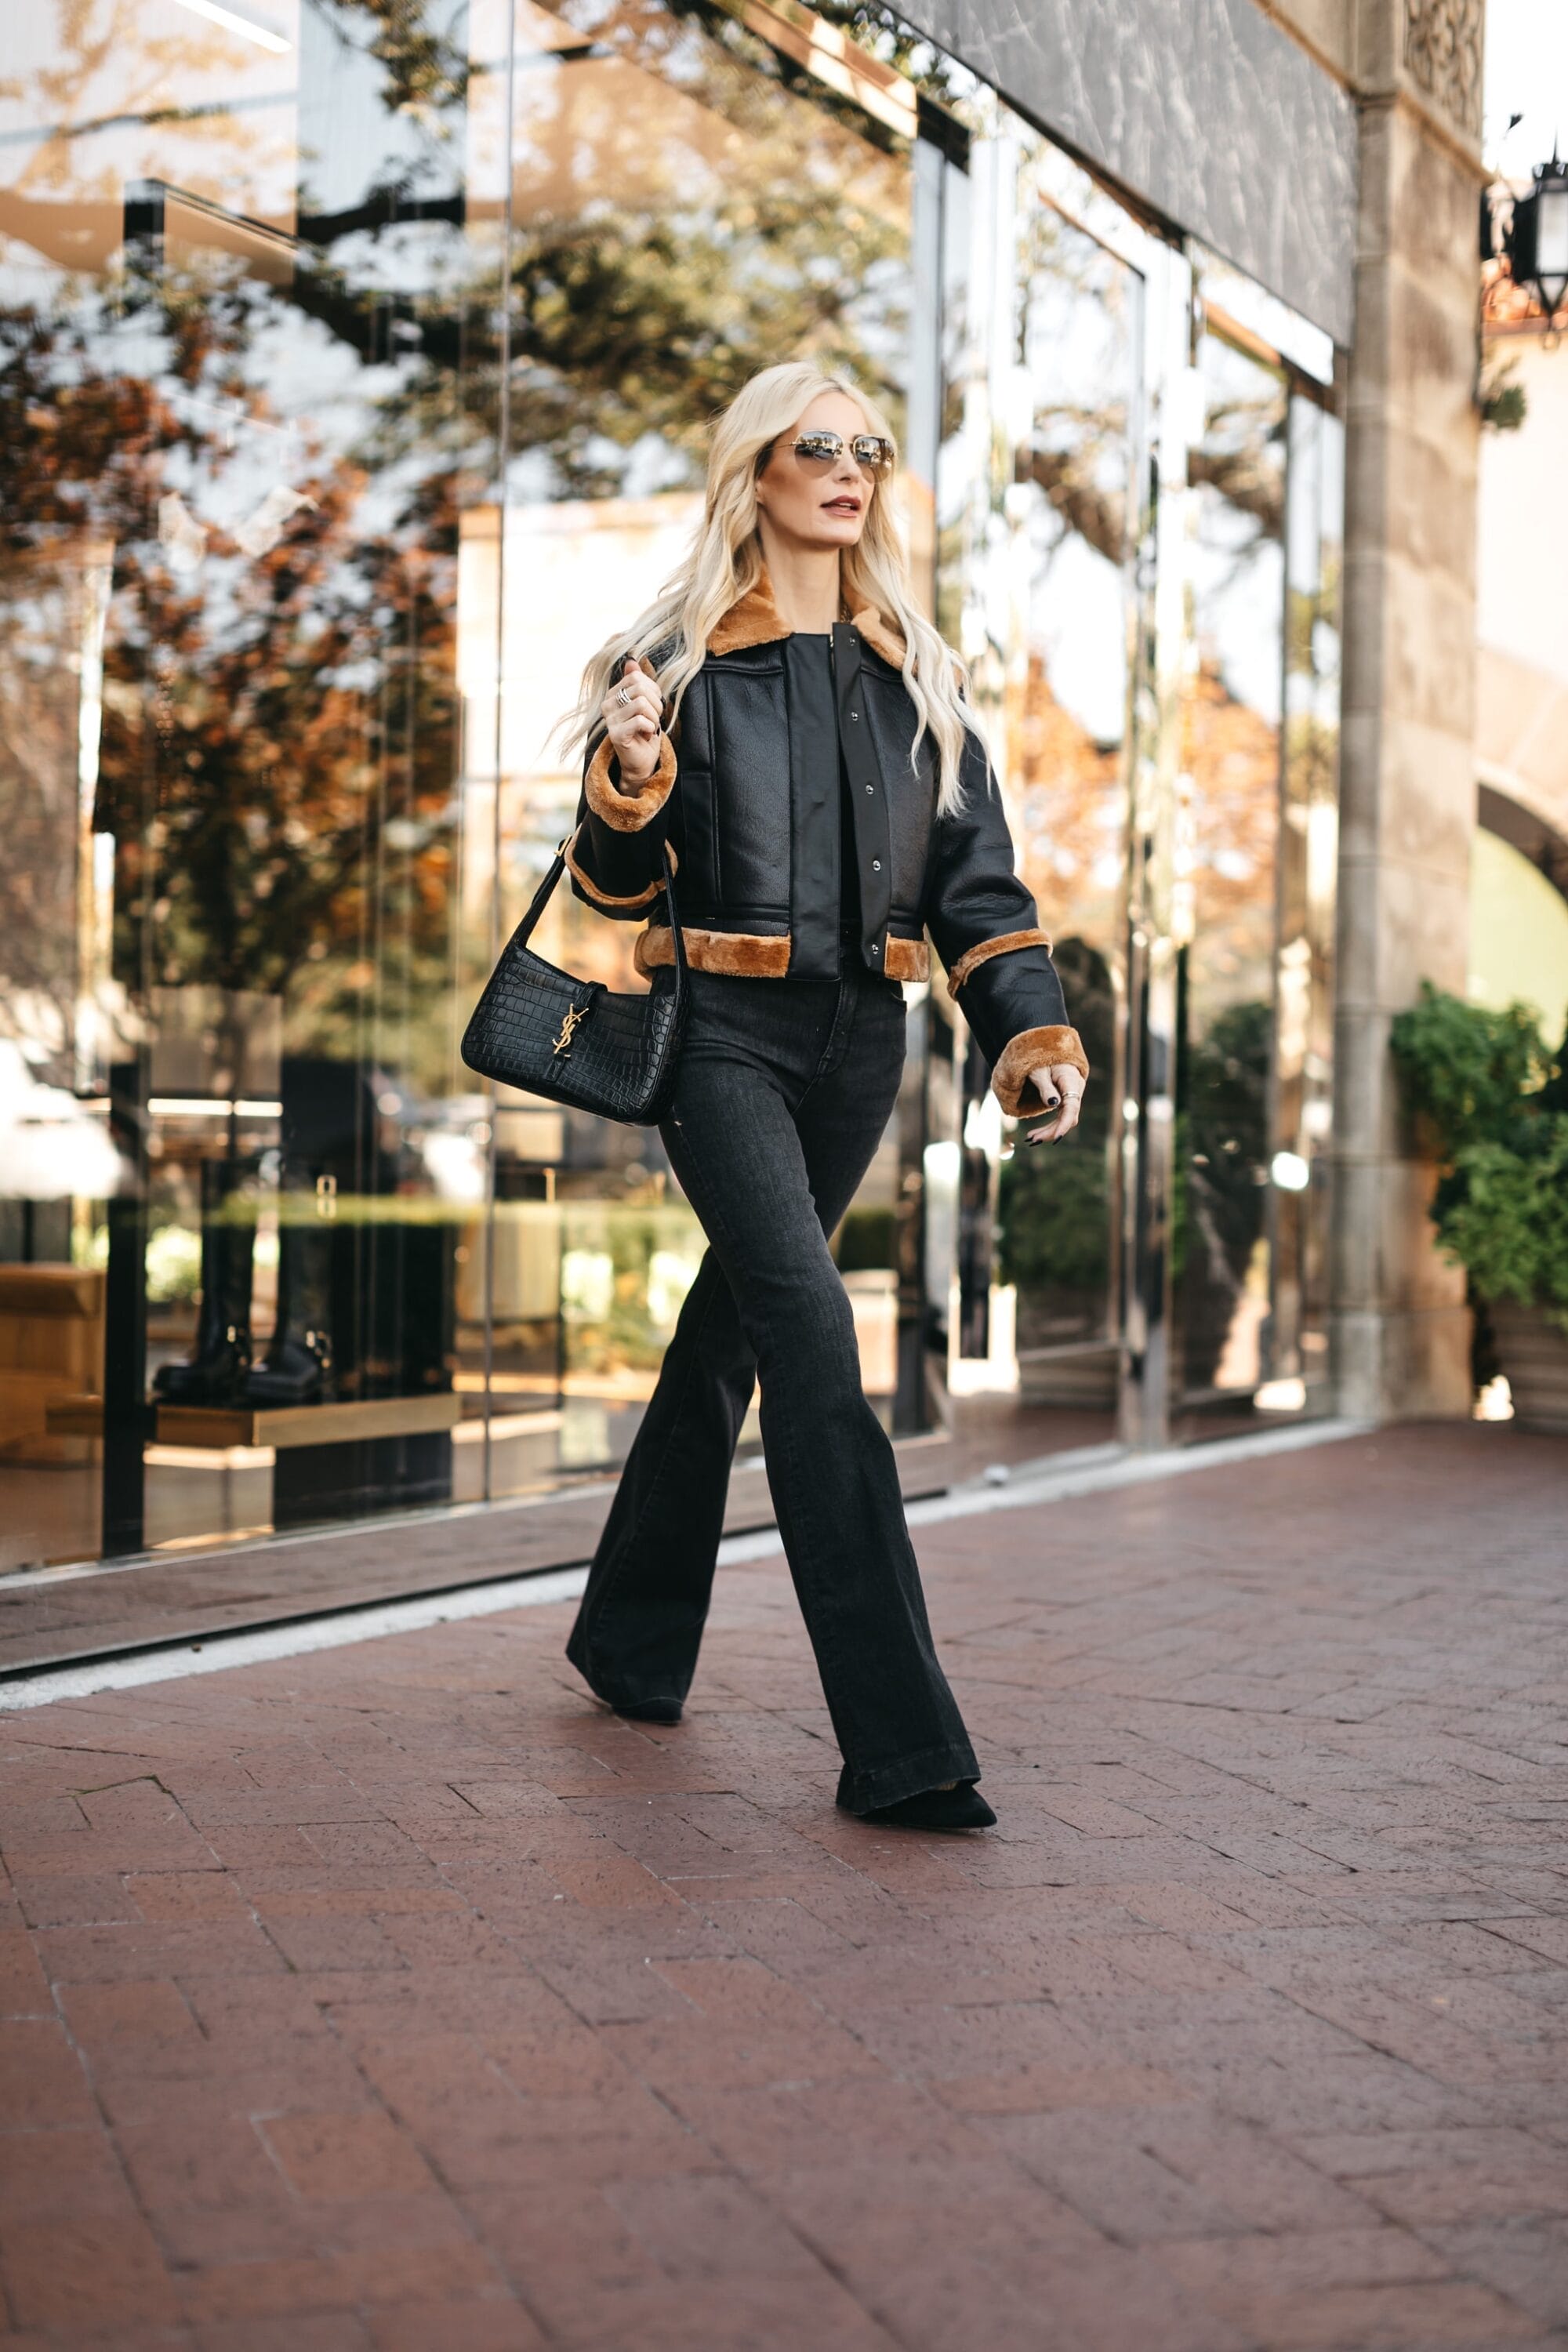 Dallas fashion influencer for women over 40 wearing a faux fur trimmed moto jacket with black jeans as one of 5 chic Thanksgiving outfits.